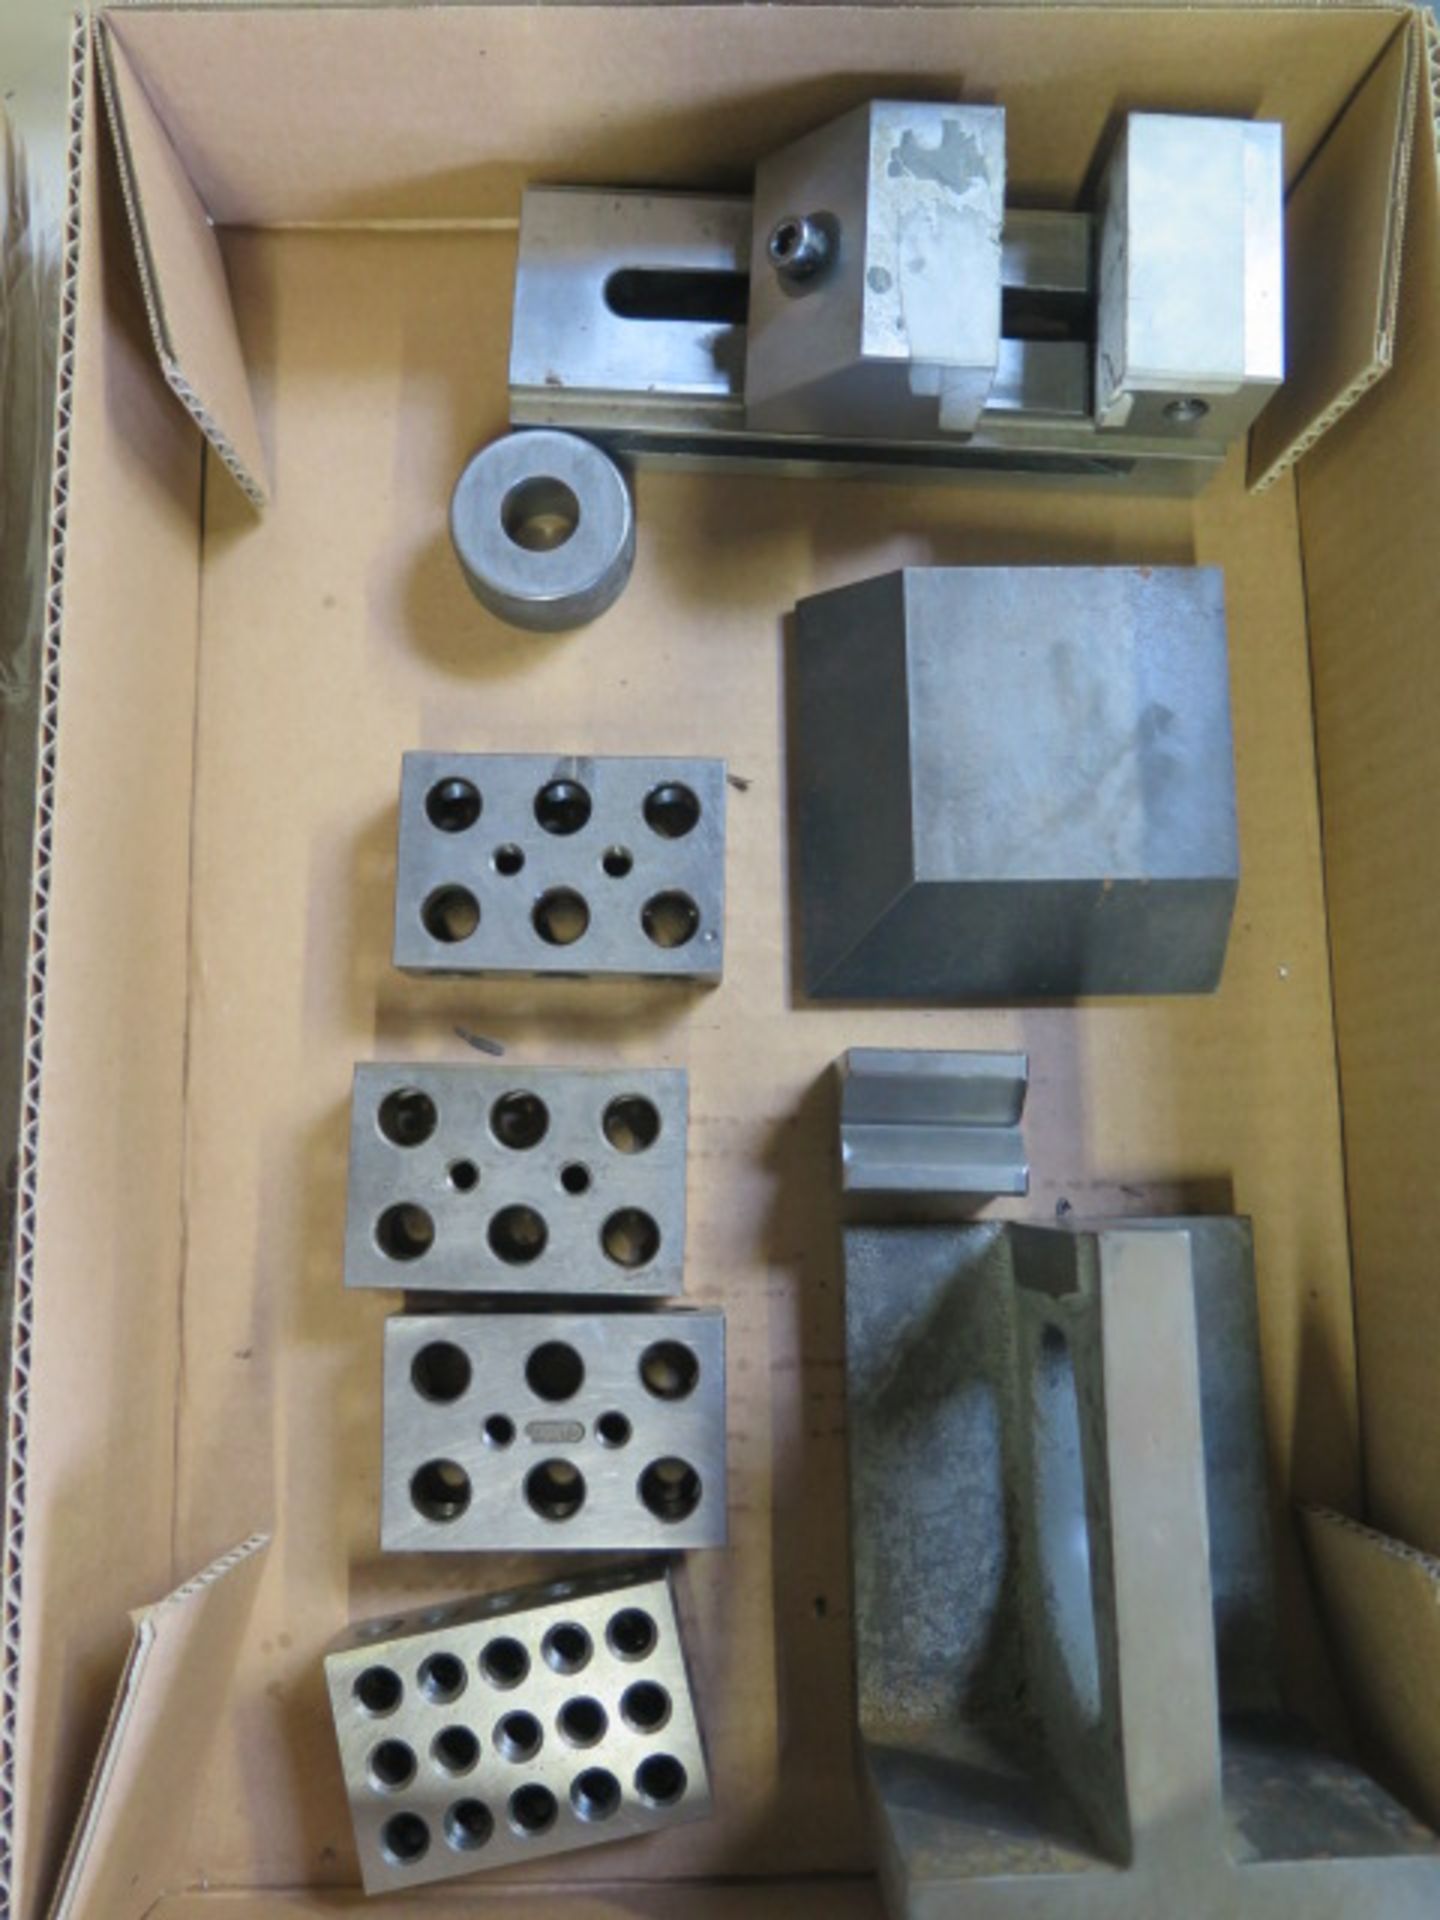 2.5" Precision Machinists Vise, 1-2-3 Blocks, Angle Plate and Misc - Image 2 of 2